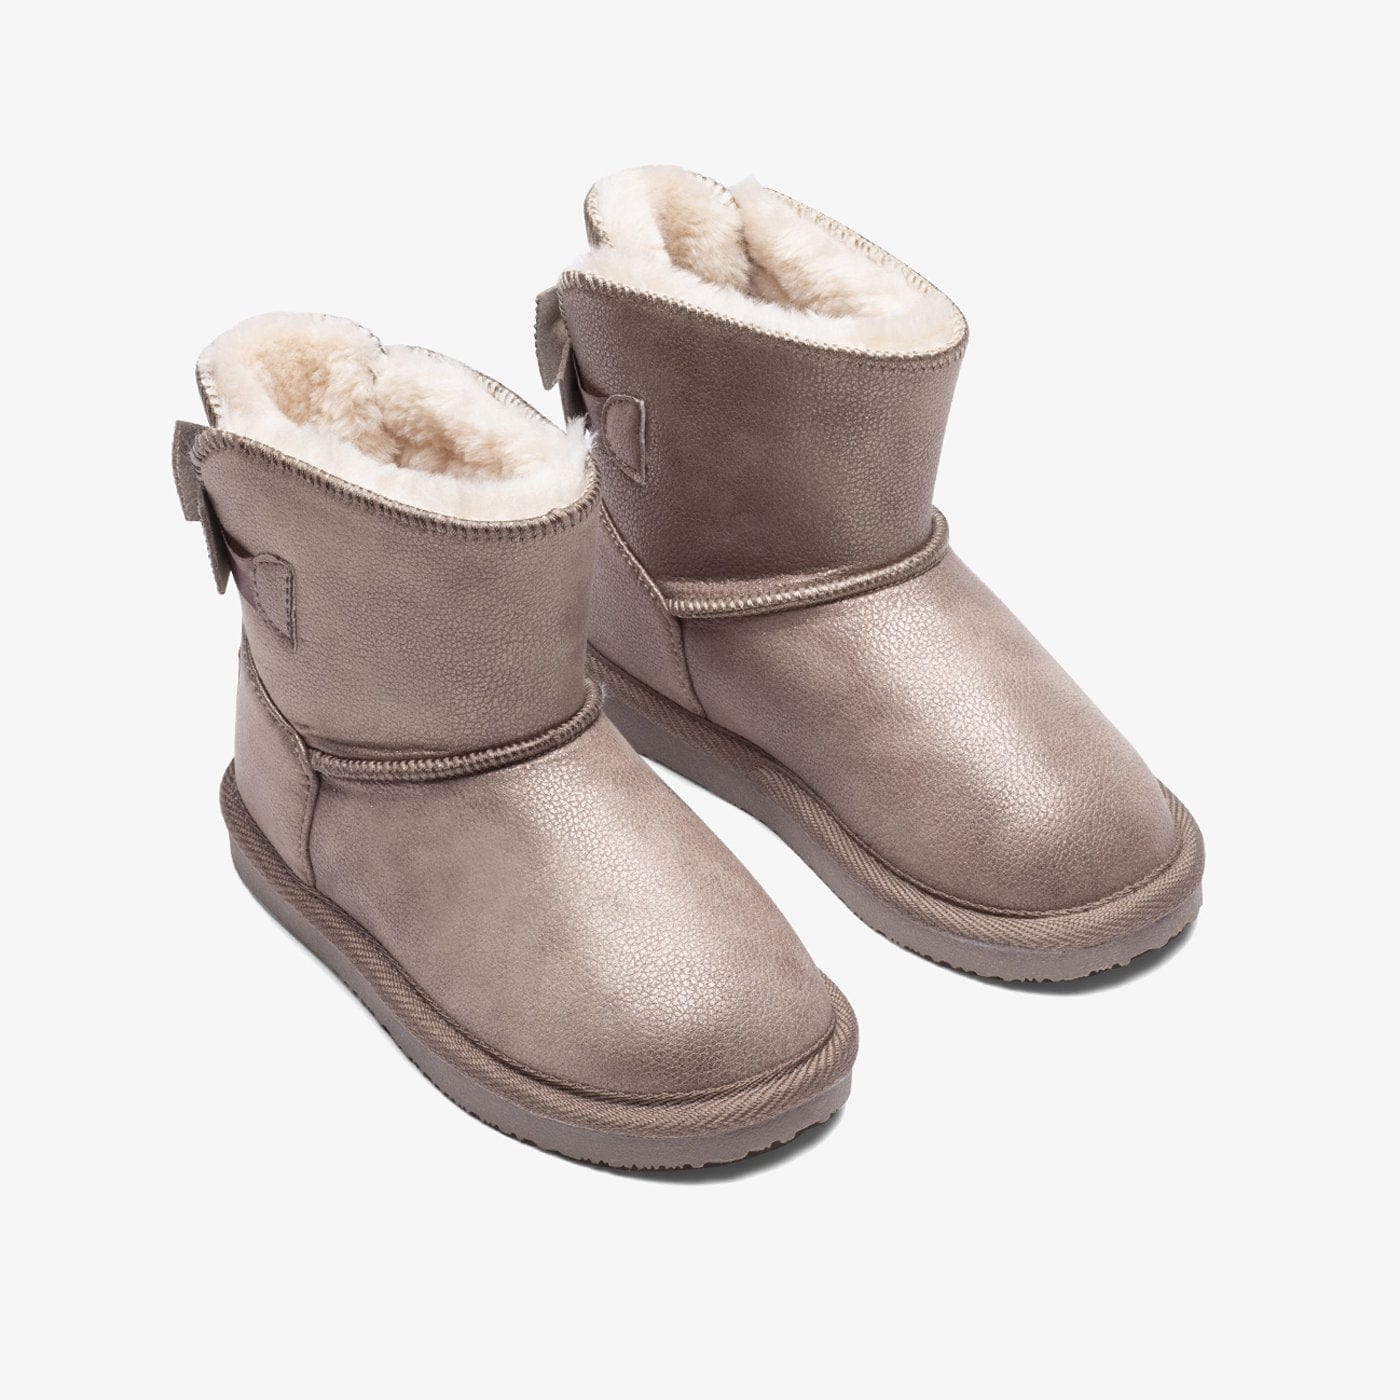 FRESAS CON NATA Shoes Girl's Taupe Strass Bow Australian Boots